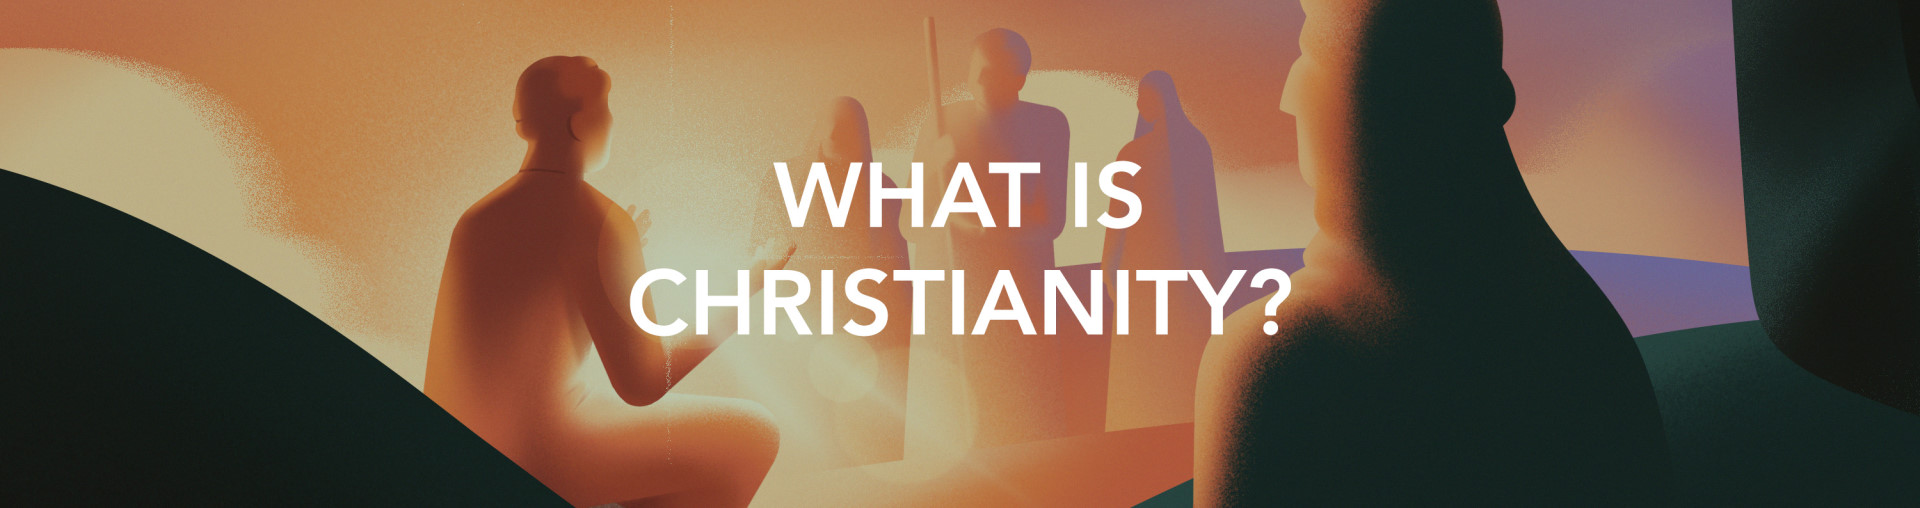 What-is-Christianity-banner HD